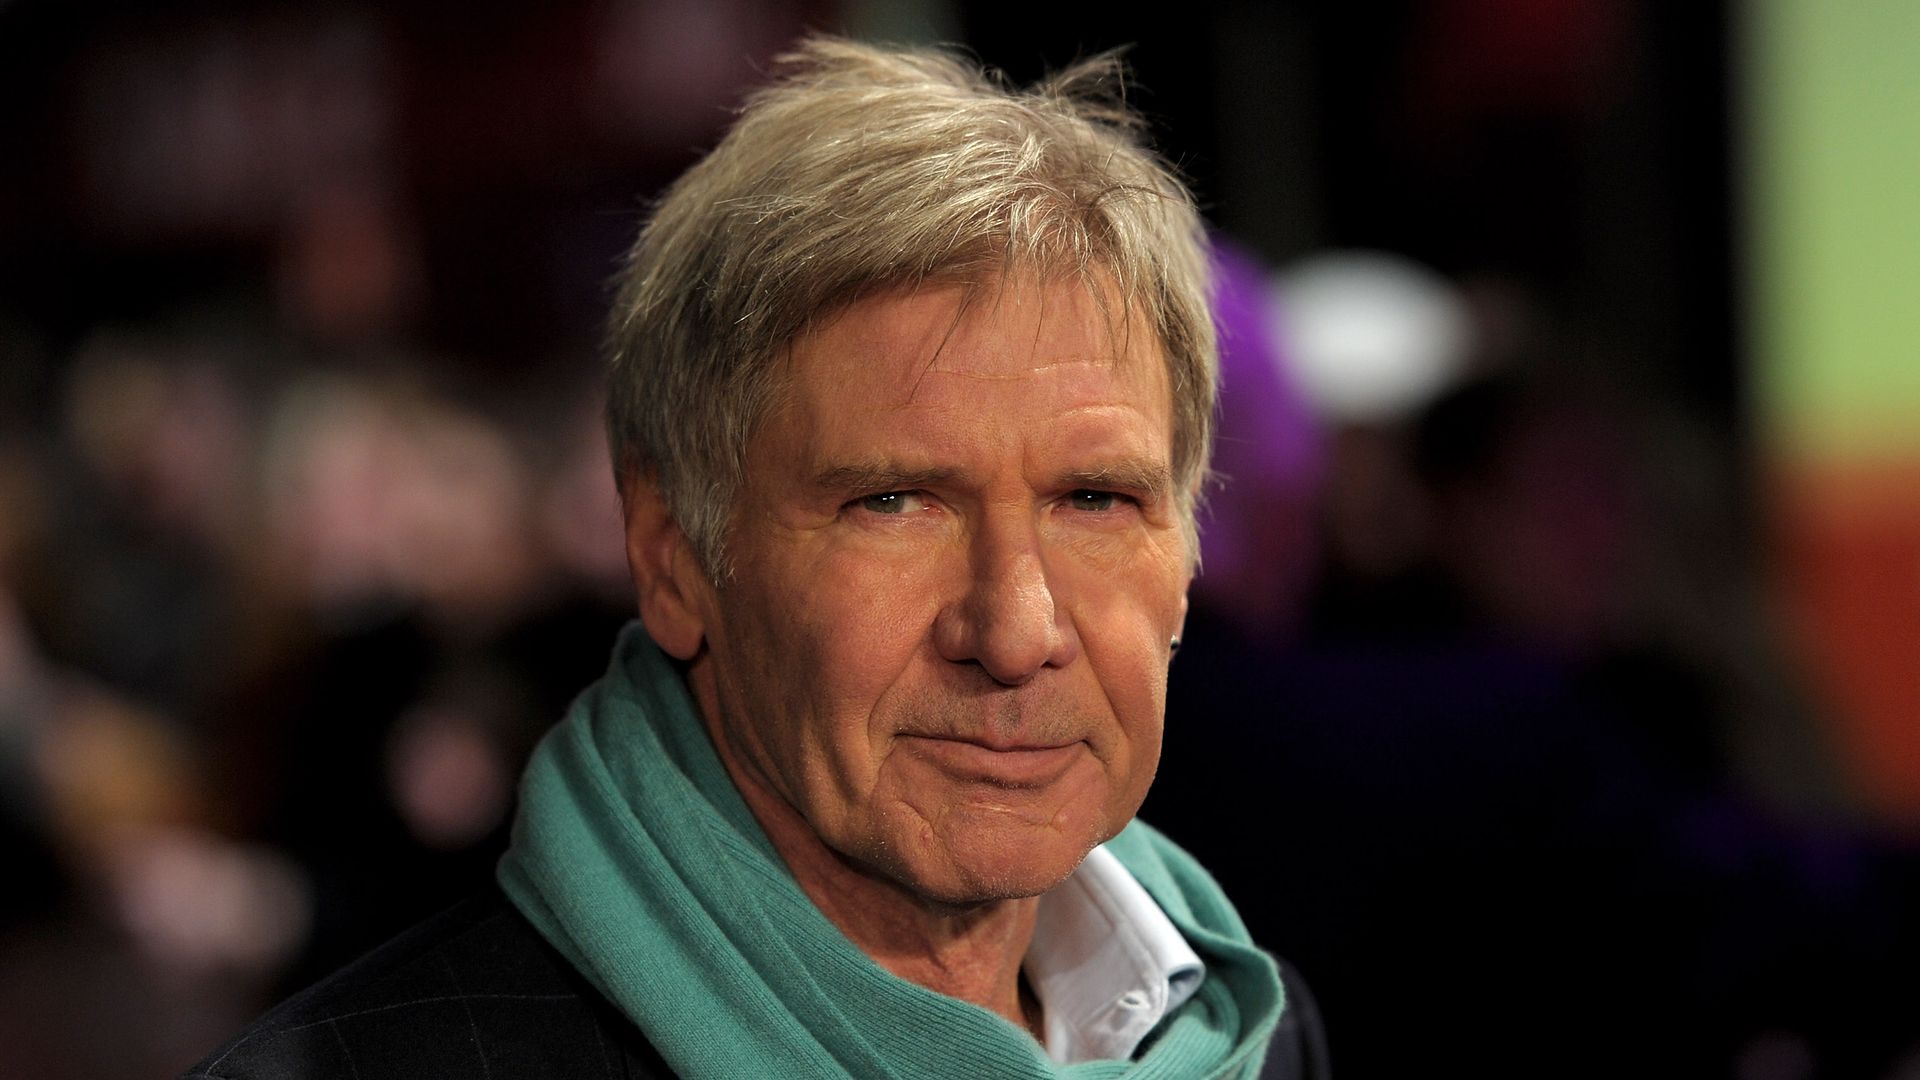 Harrison Ford proves he's still going strong in on set photos amid 82nd birthday